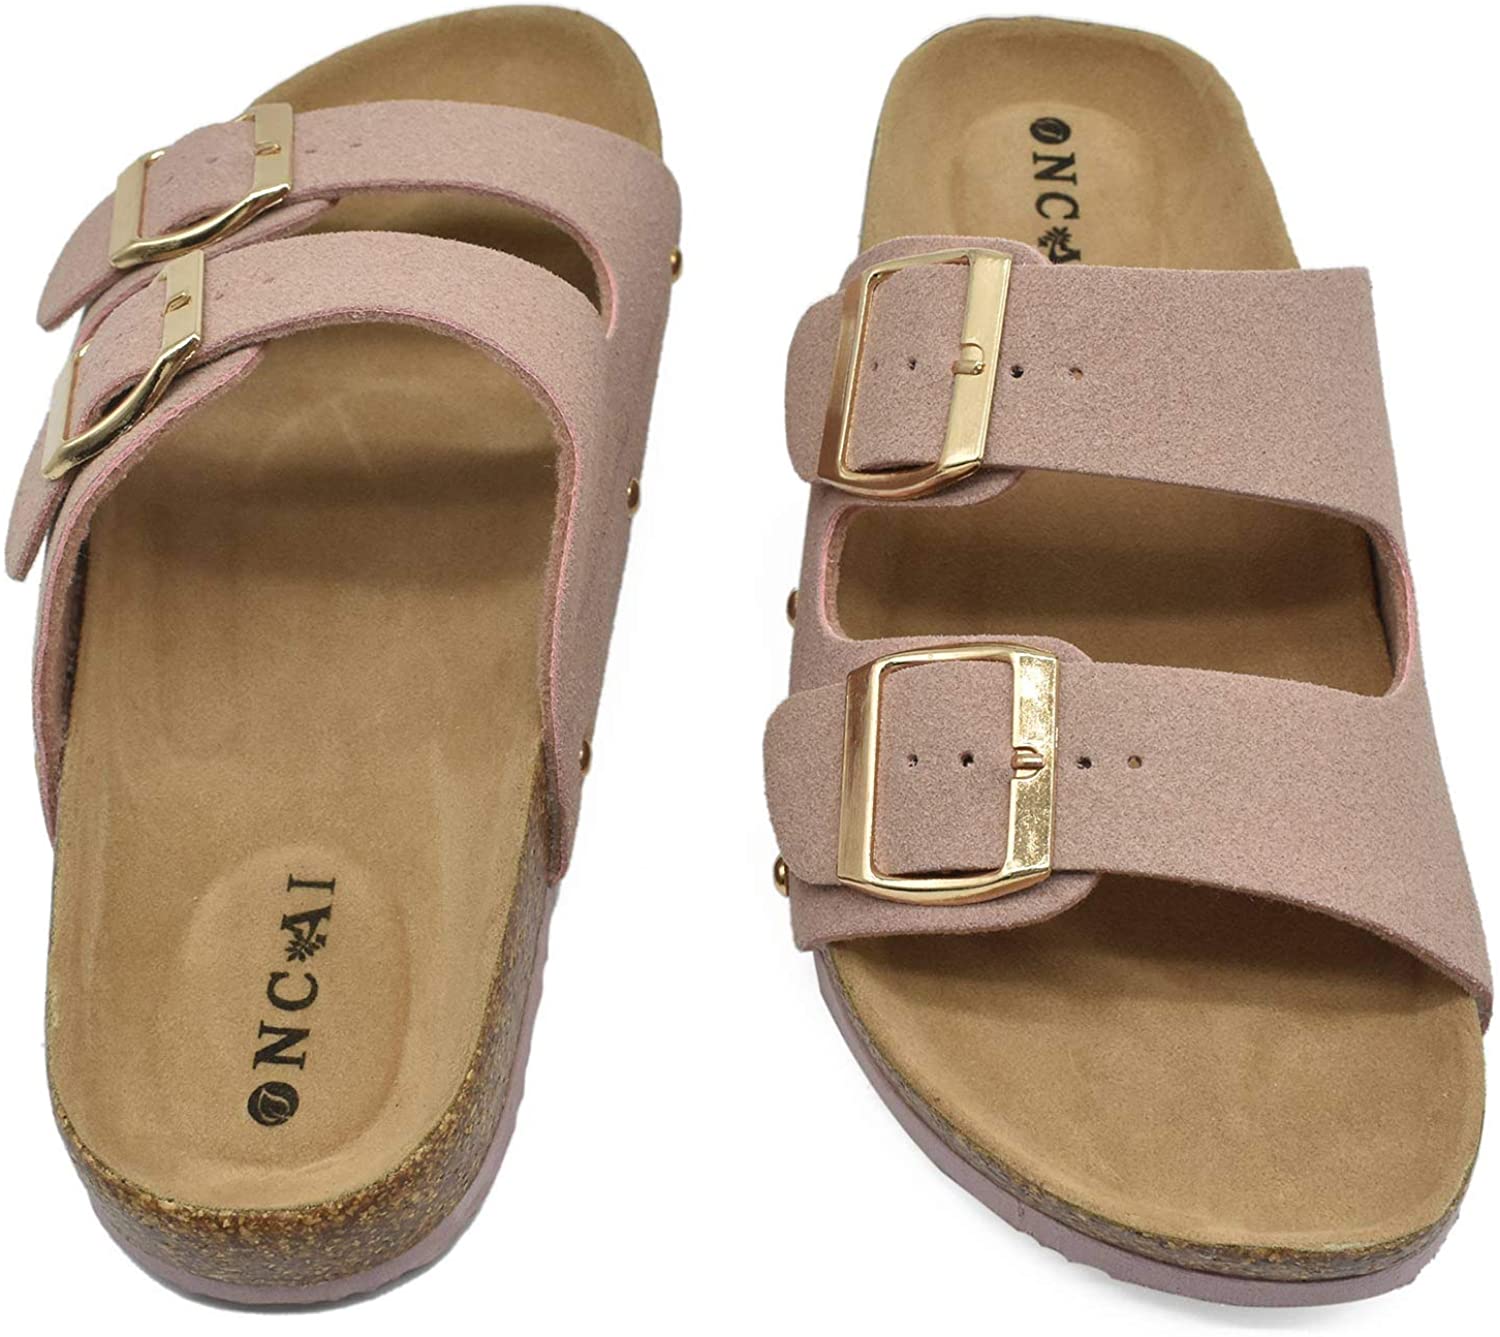 Womens Flat Slide Sandals with Arch Support 2 Strap Adjustable, Pink ...